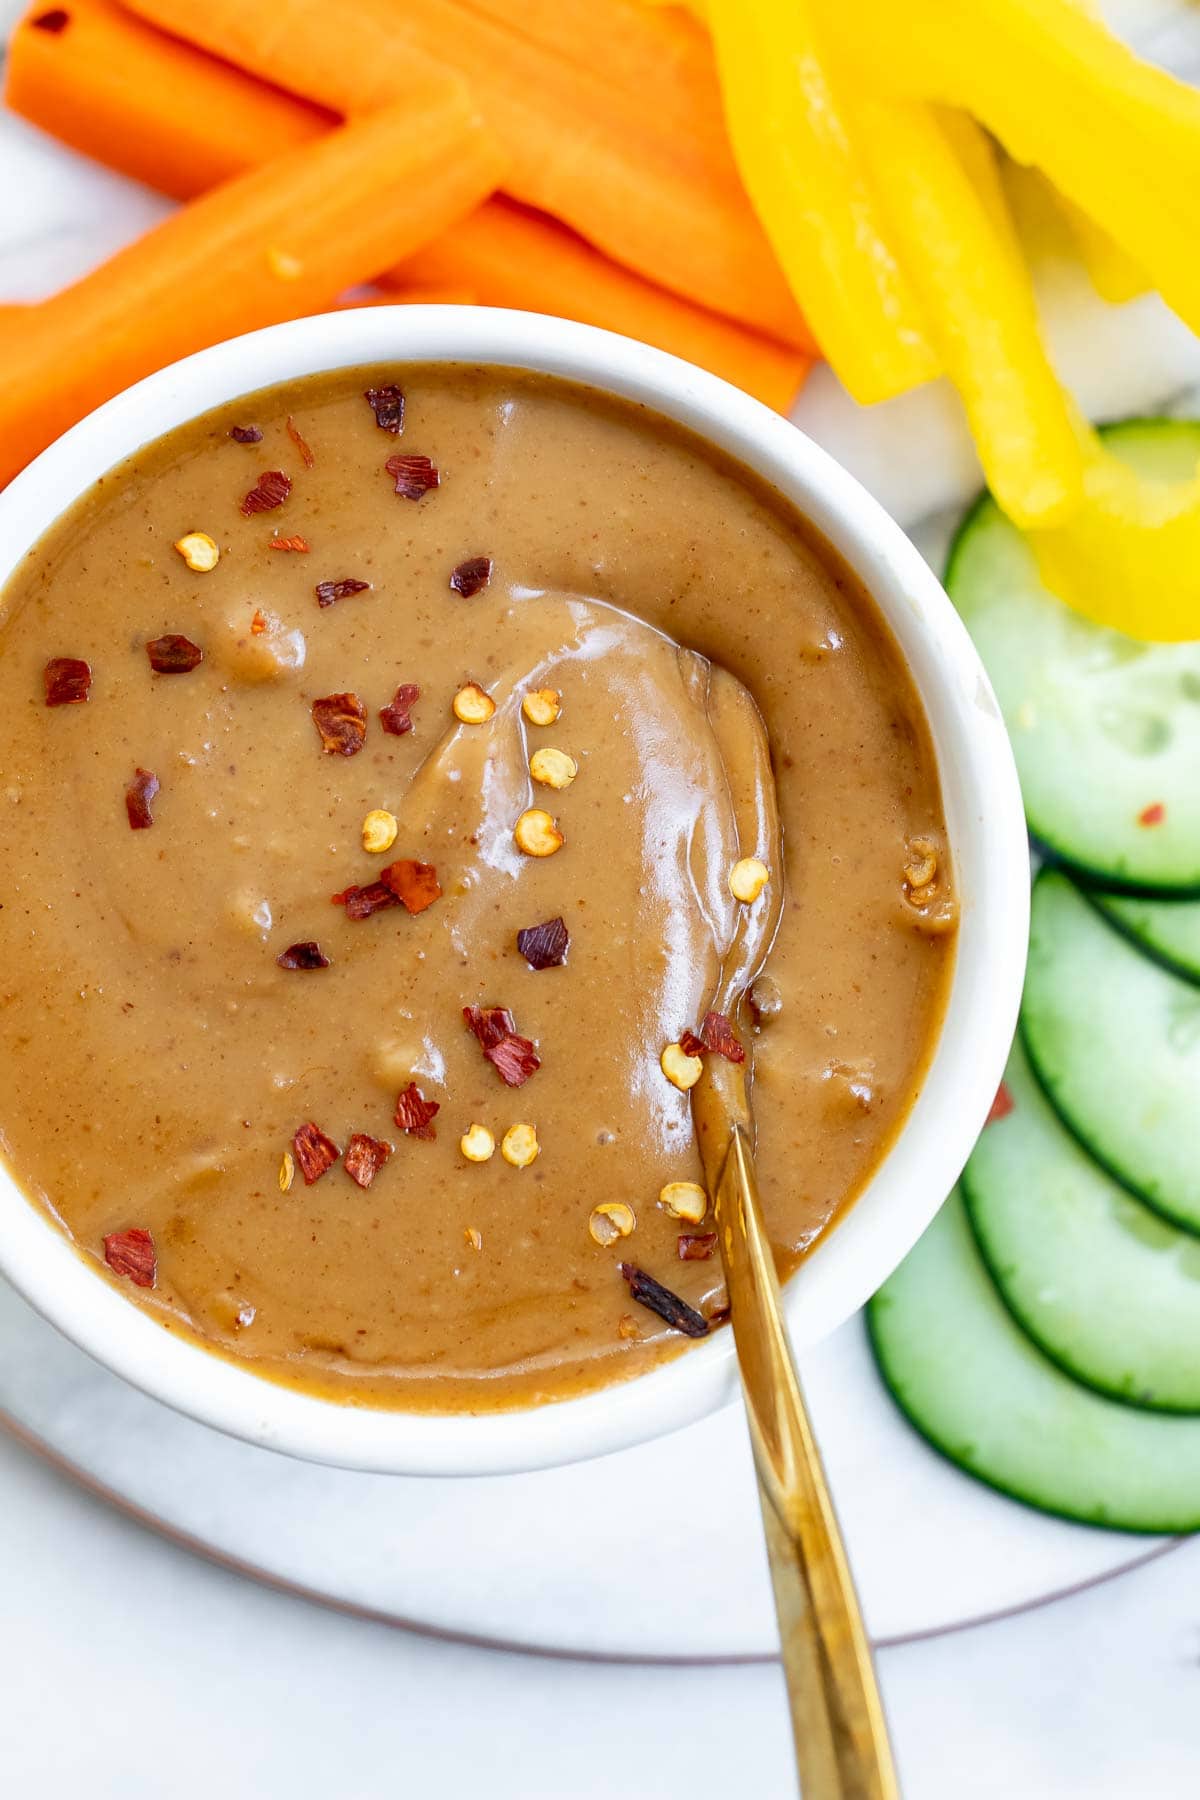 Up close image of the peanut sauce with a spoon on the side.